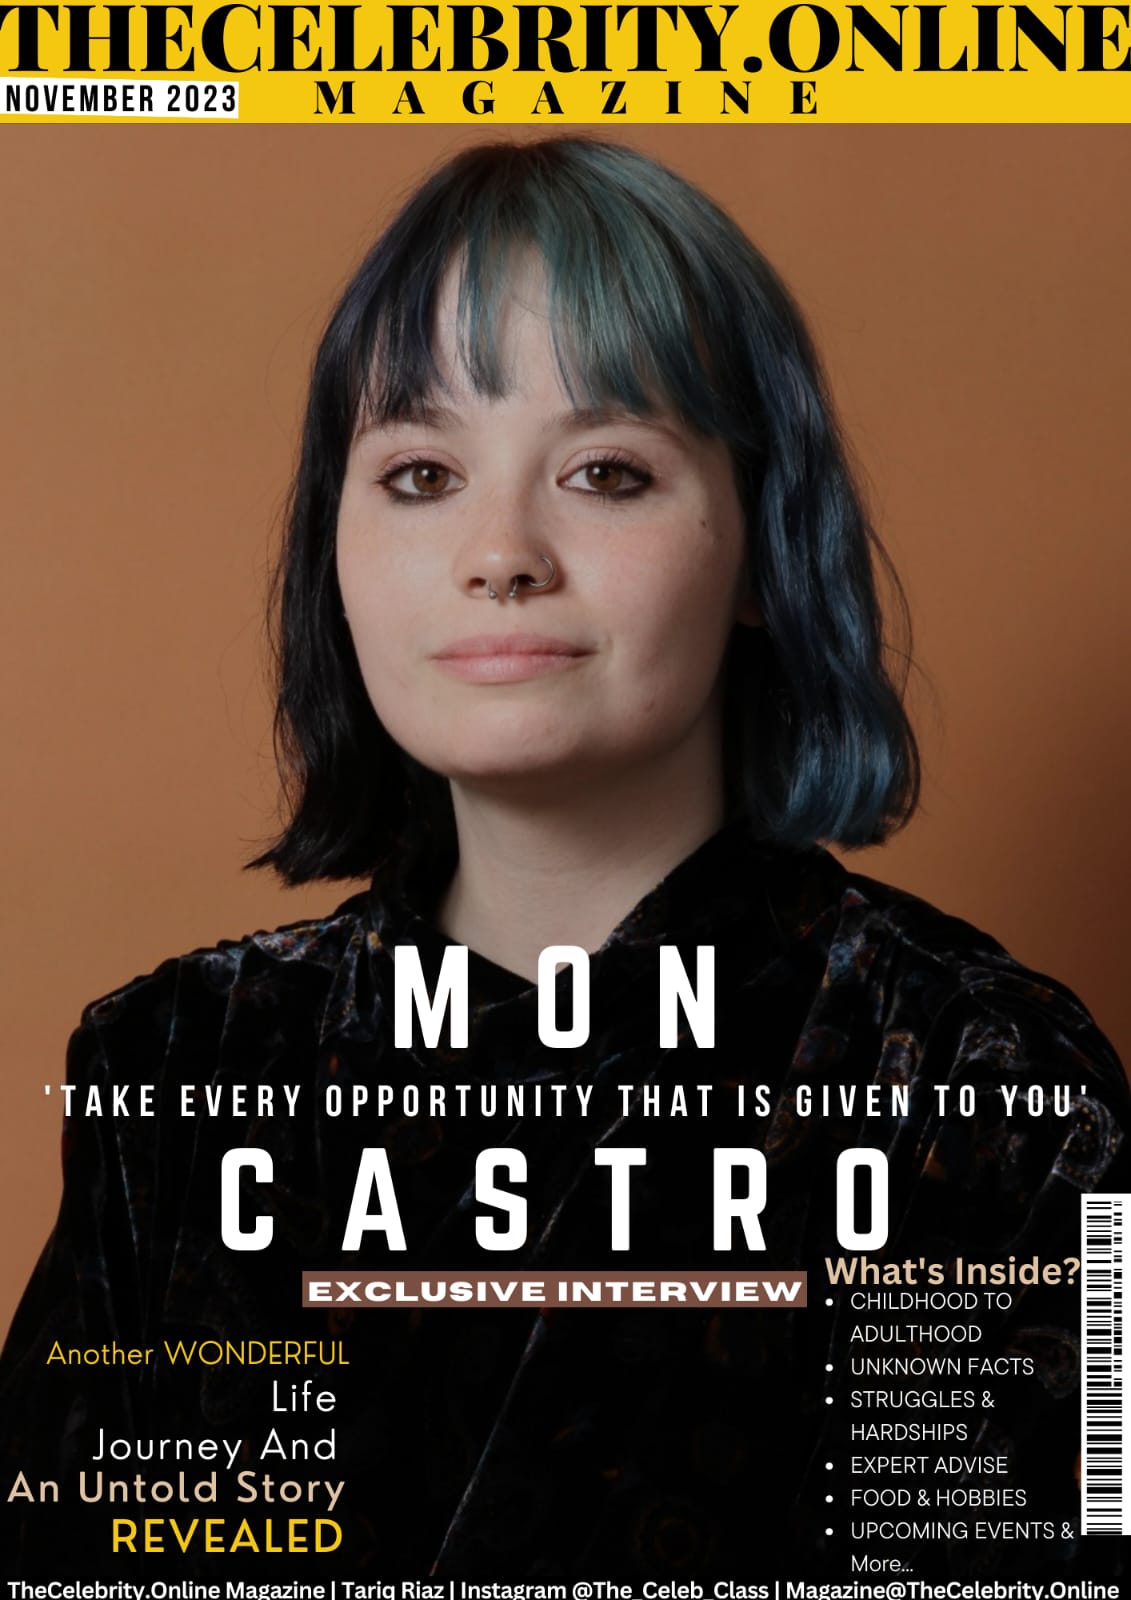 Mon Castro Exclusive Interview – ‘Take Every Opportunity That Is Given To You’